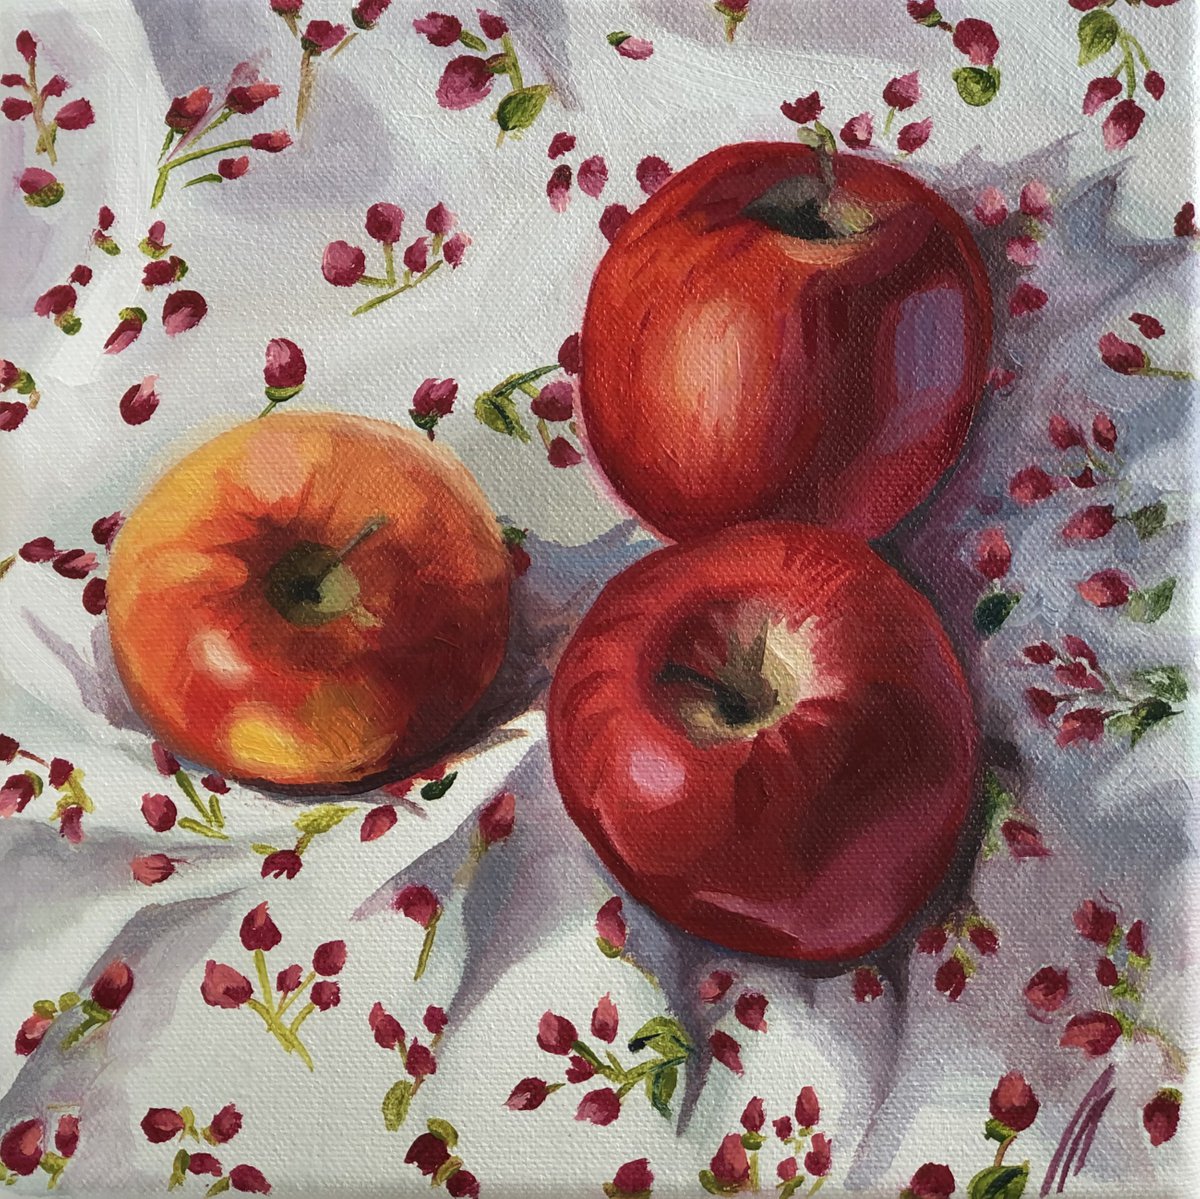 Apples on a floral background by Olena Levchii